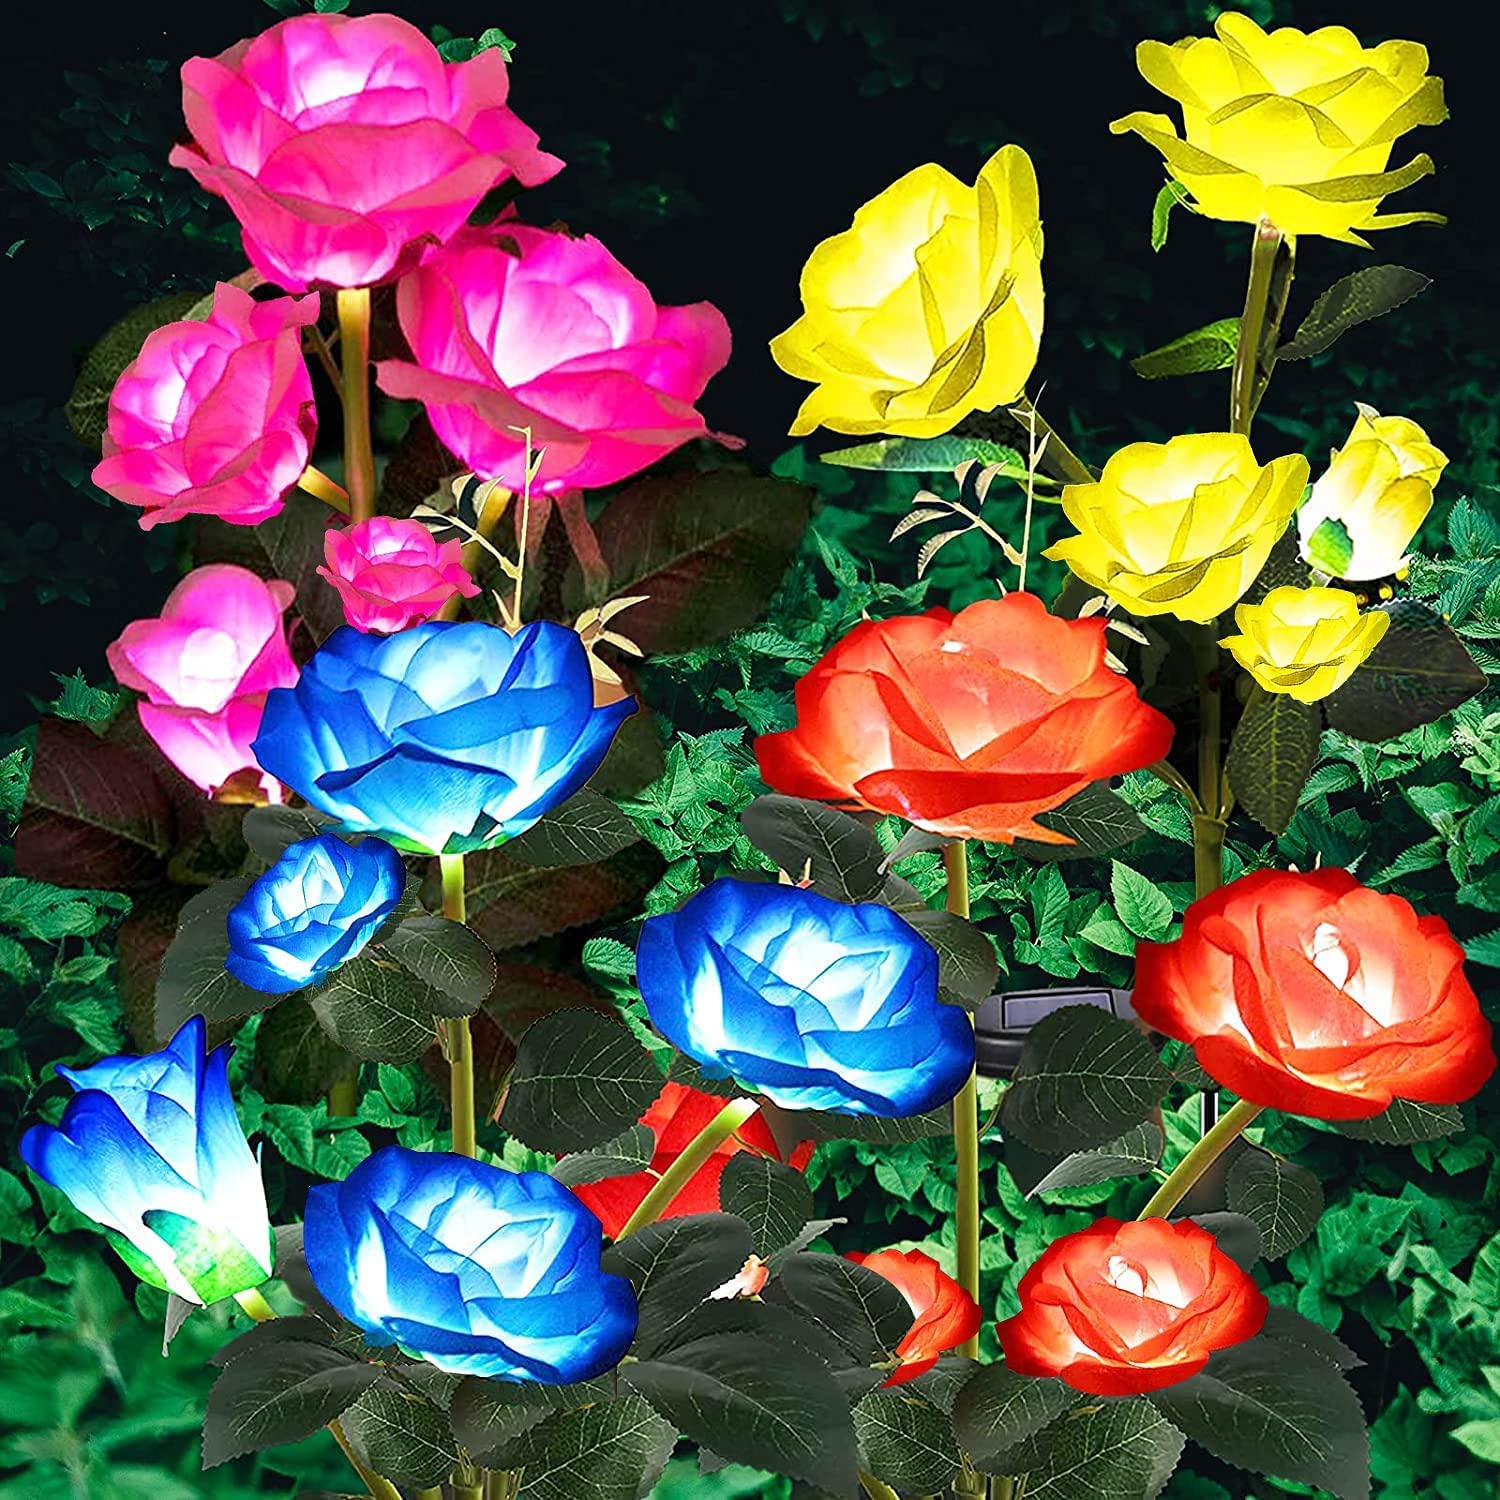 ANGMLN 4 Pack Solar Flowers Lights Outdoor Decorative, 7 Color Changing Rose Lights 12 Head Rose for Pathway, Garden Patio Yard Party Wedding Holiday Outdoor Decoration (Red, Pink, Yellow, Blue)